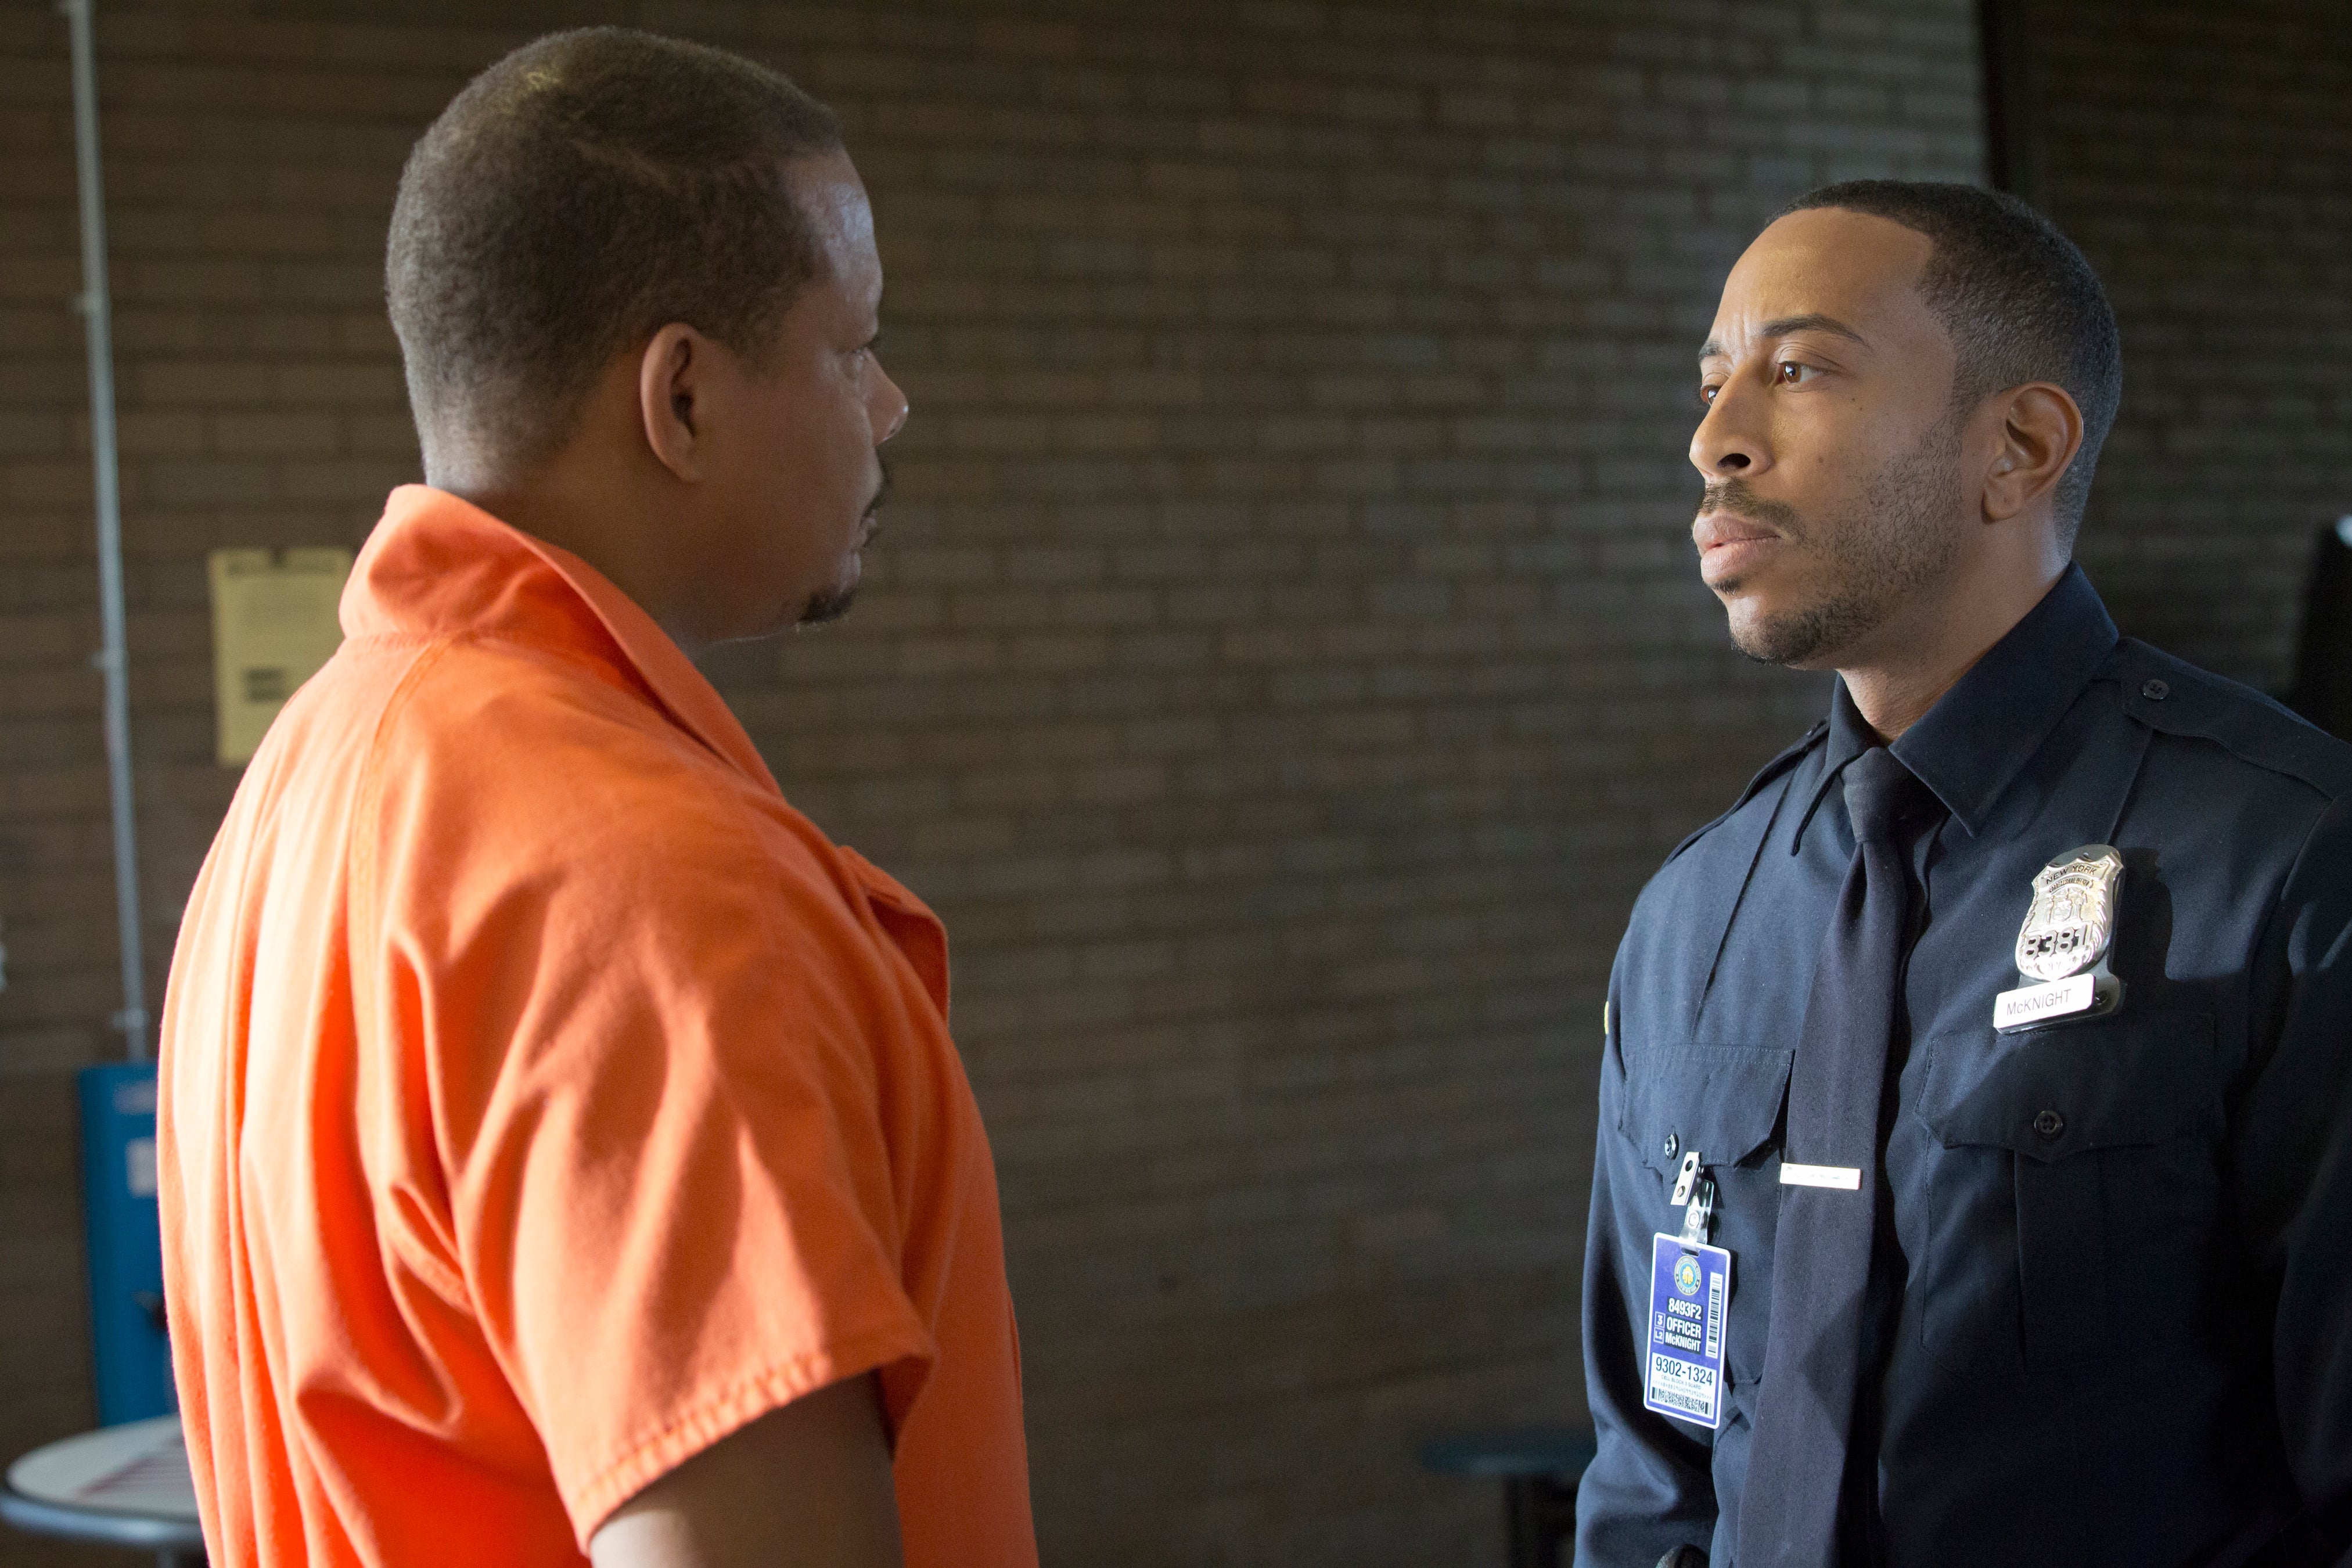 Get Your "Empire" Fix with a Sneak Peek of Episode 2
